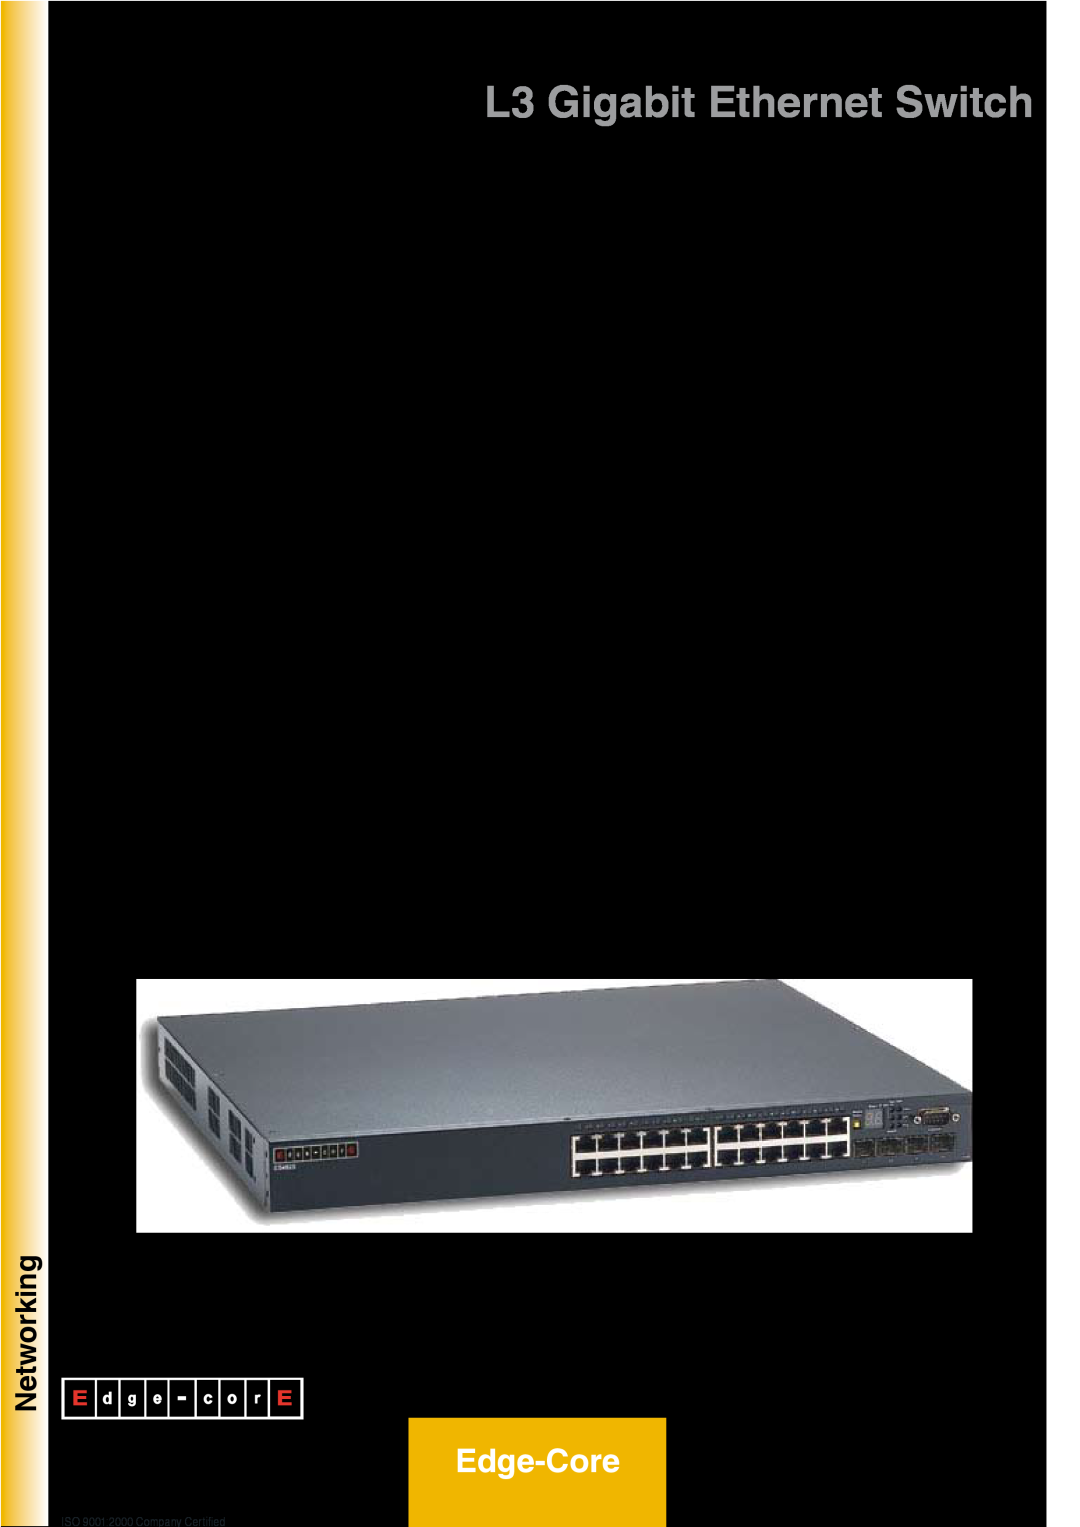 Atlantis Land A07-ES4625 manual L3 Gigabit Ethernet Switch, Edge-Core, Networking, ISO 90012000 Company Certified 